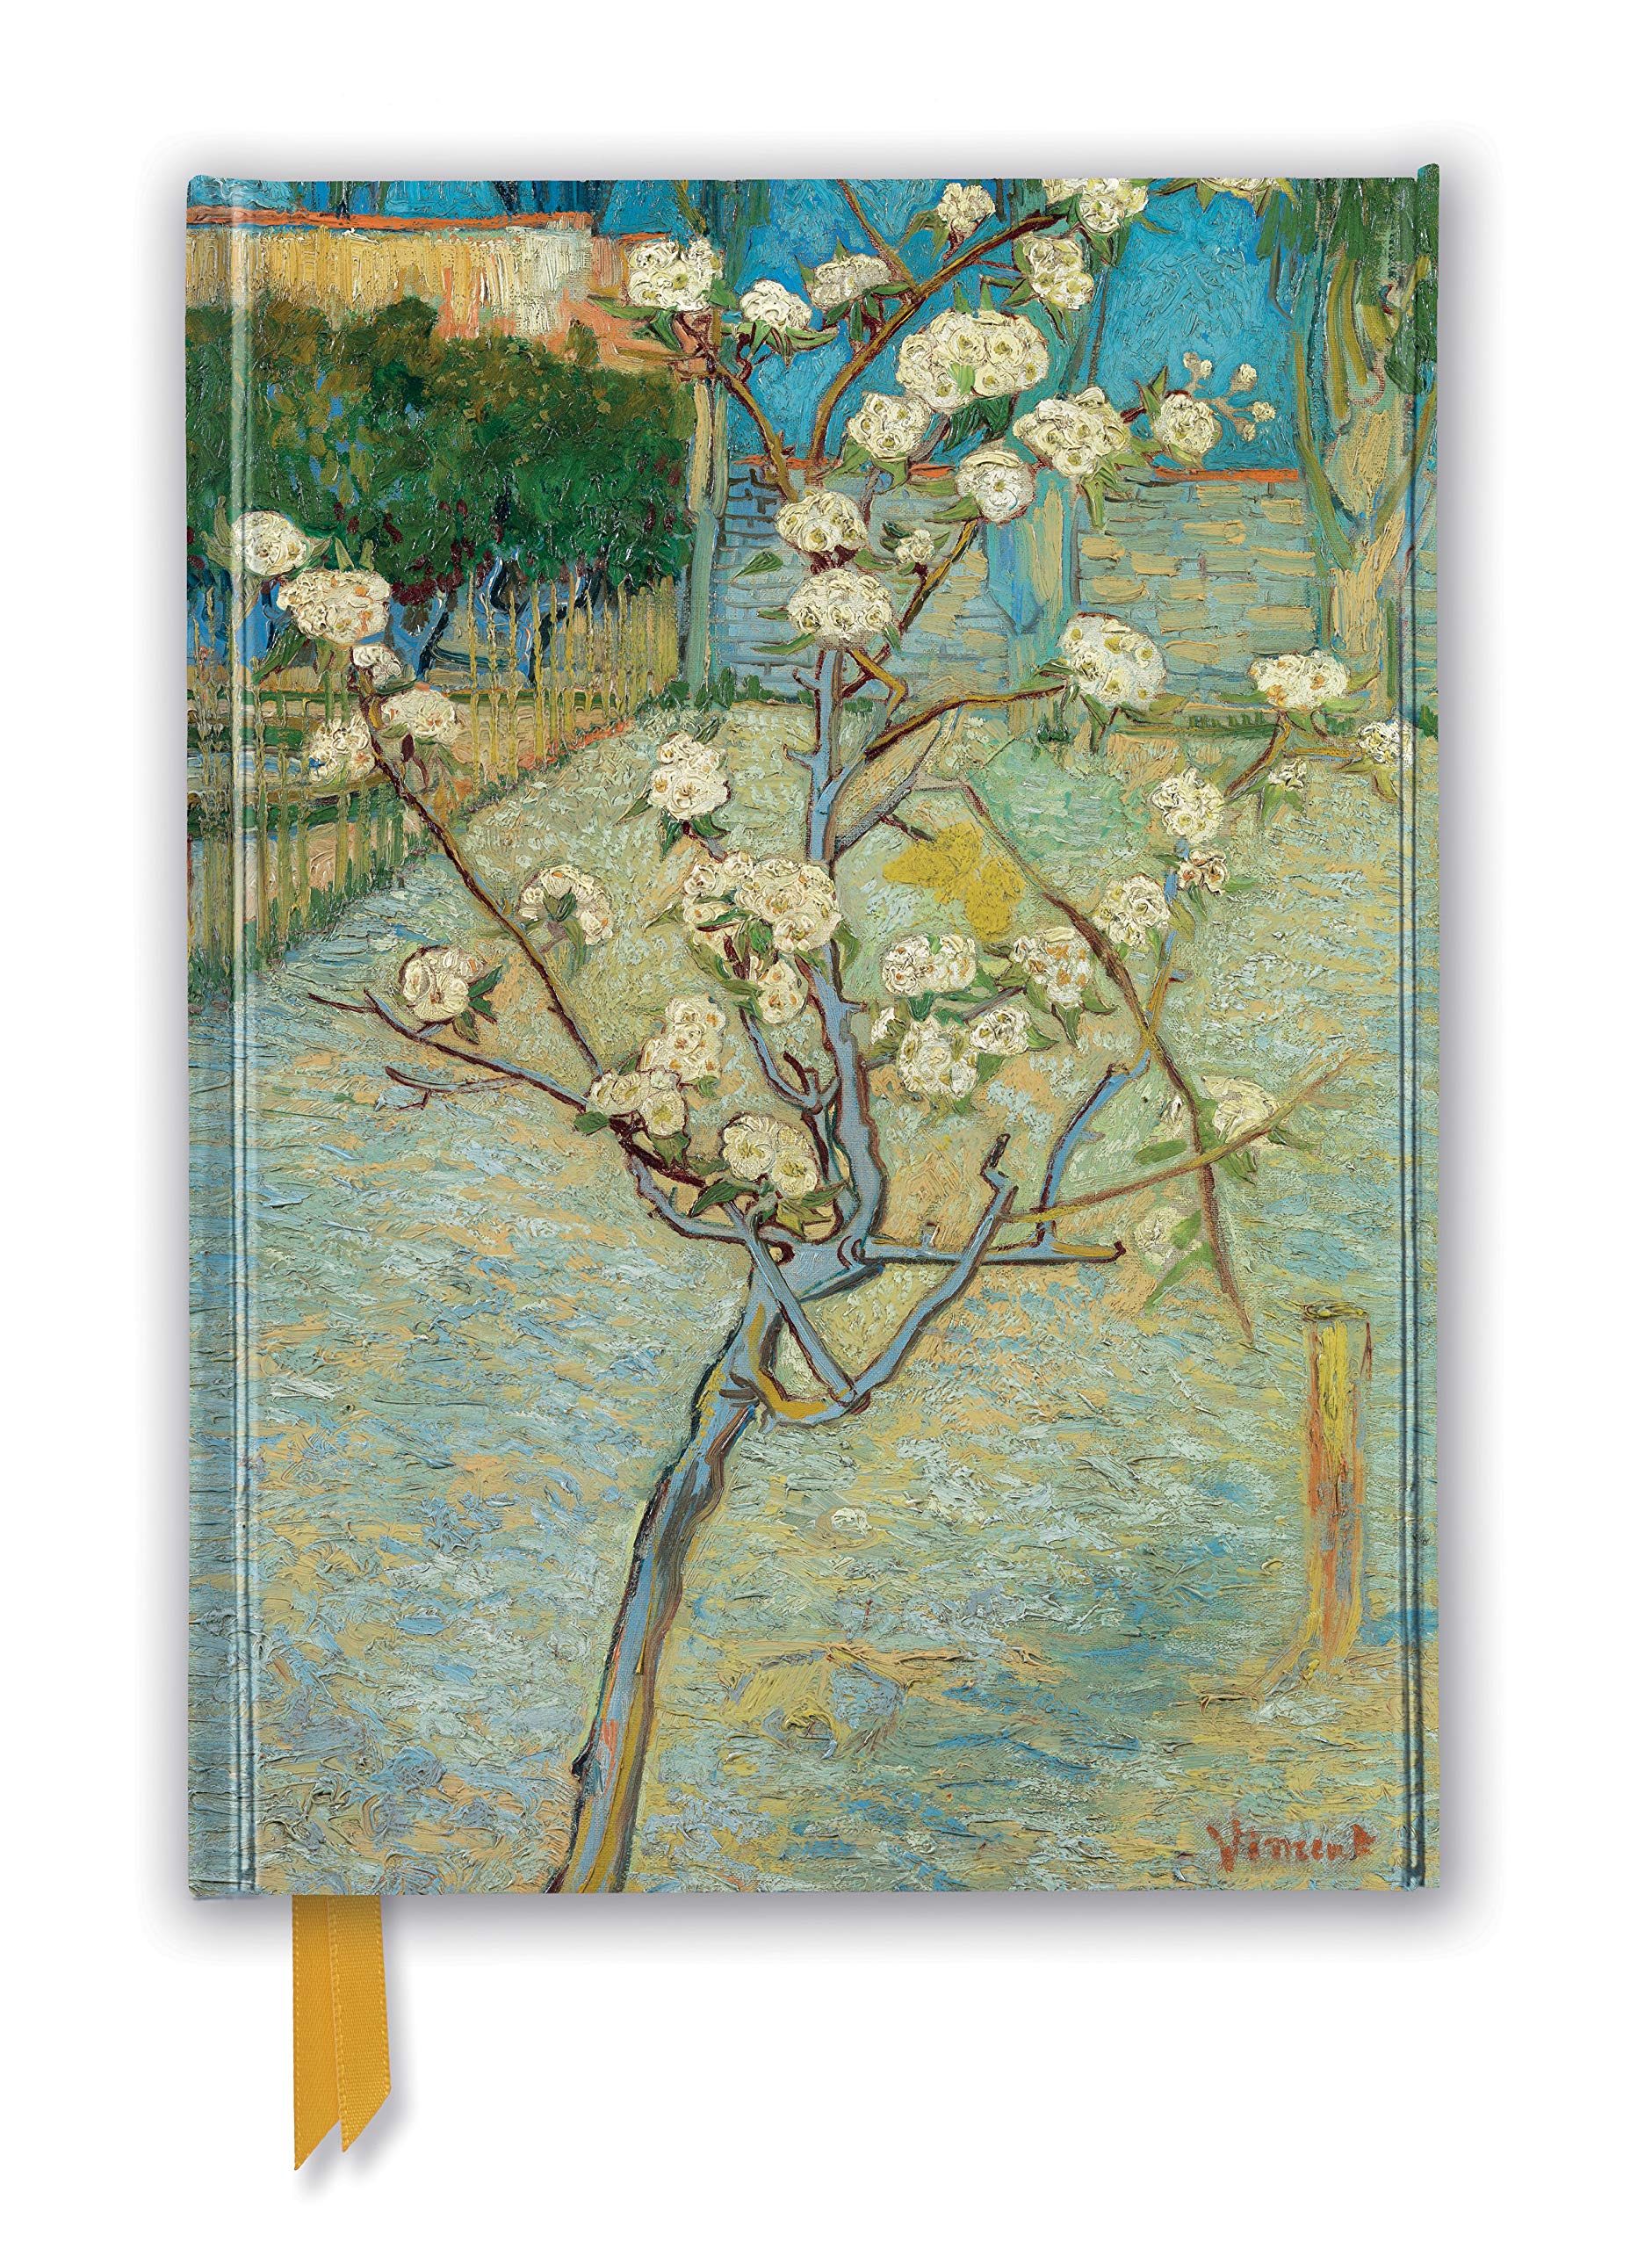 Jurnal - Vincent Van Gogh - Small Pear Tree in Blossom | Flame Tree Publishing